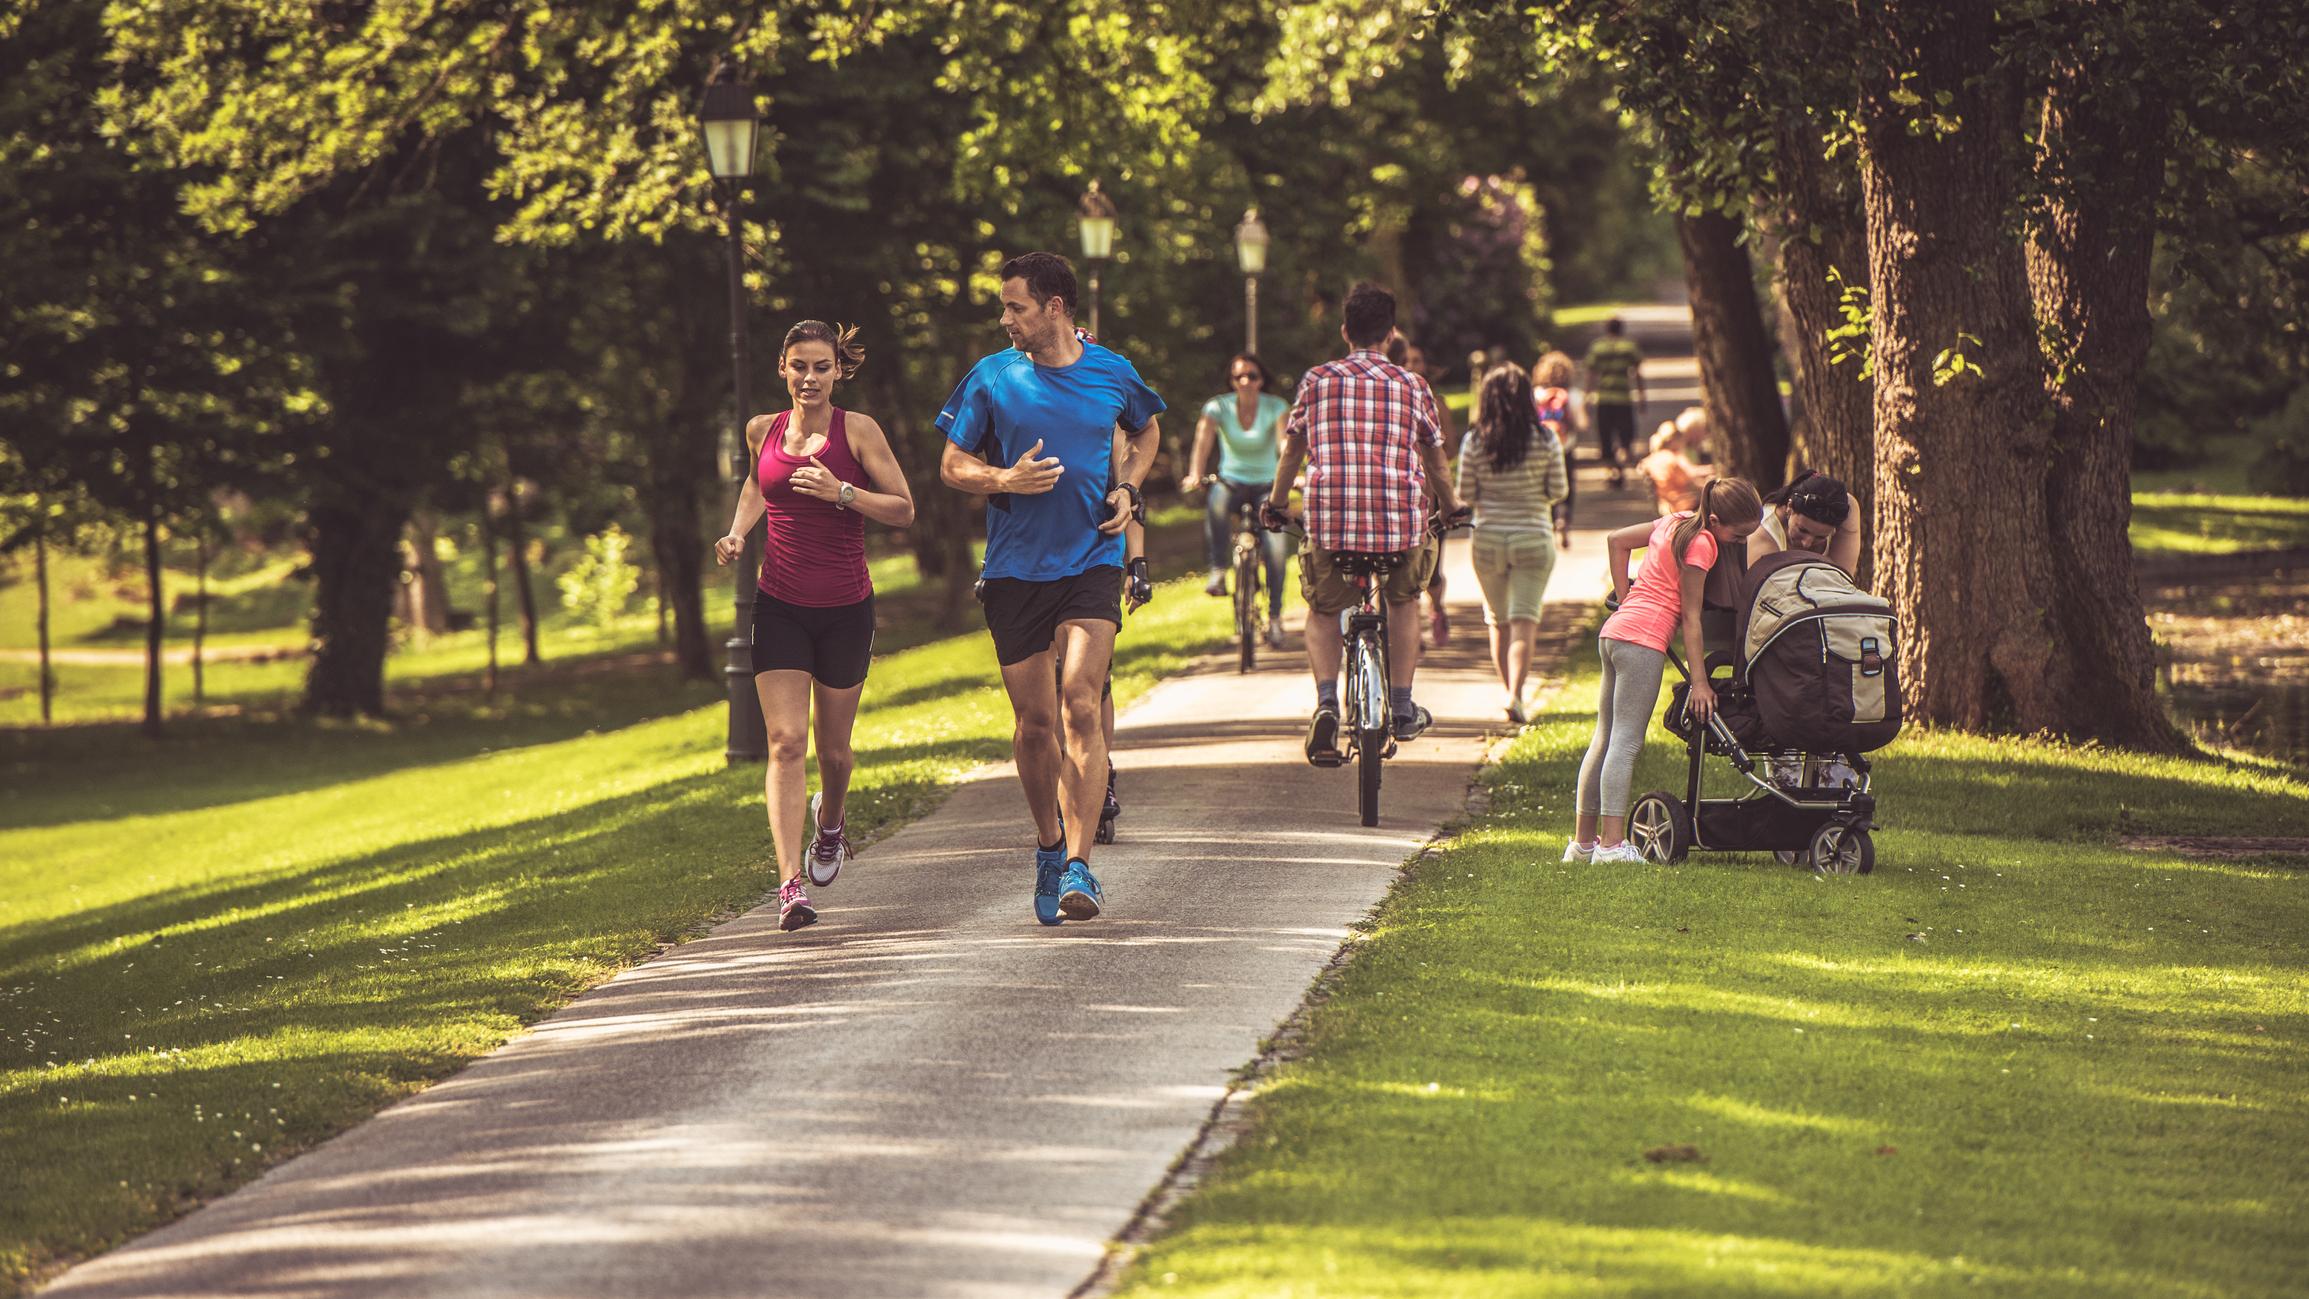 People jogging on a trail in a park and others riding bikes and walking under shade trees.